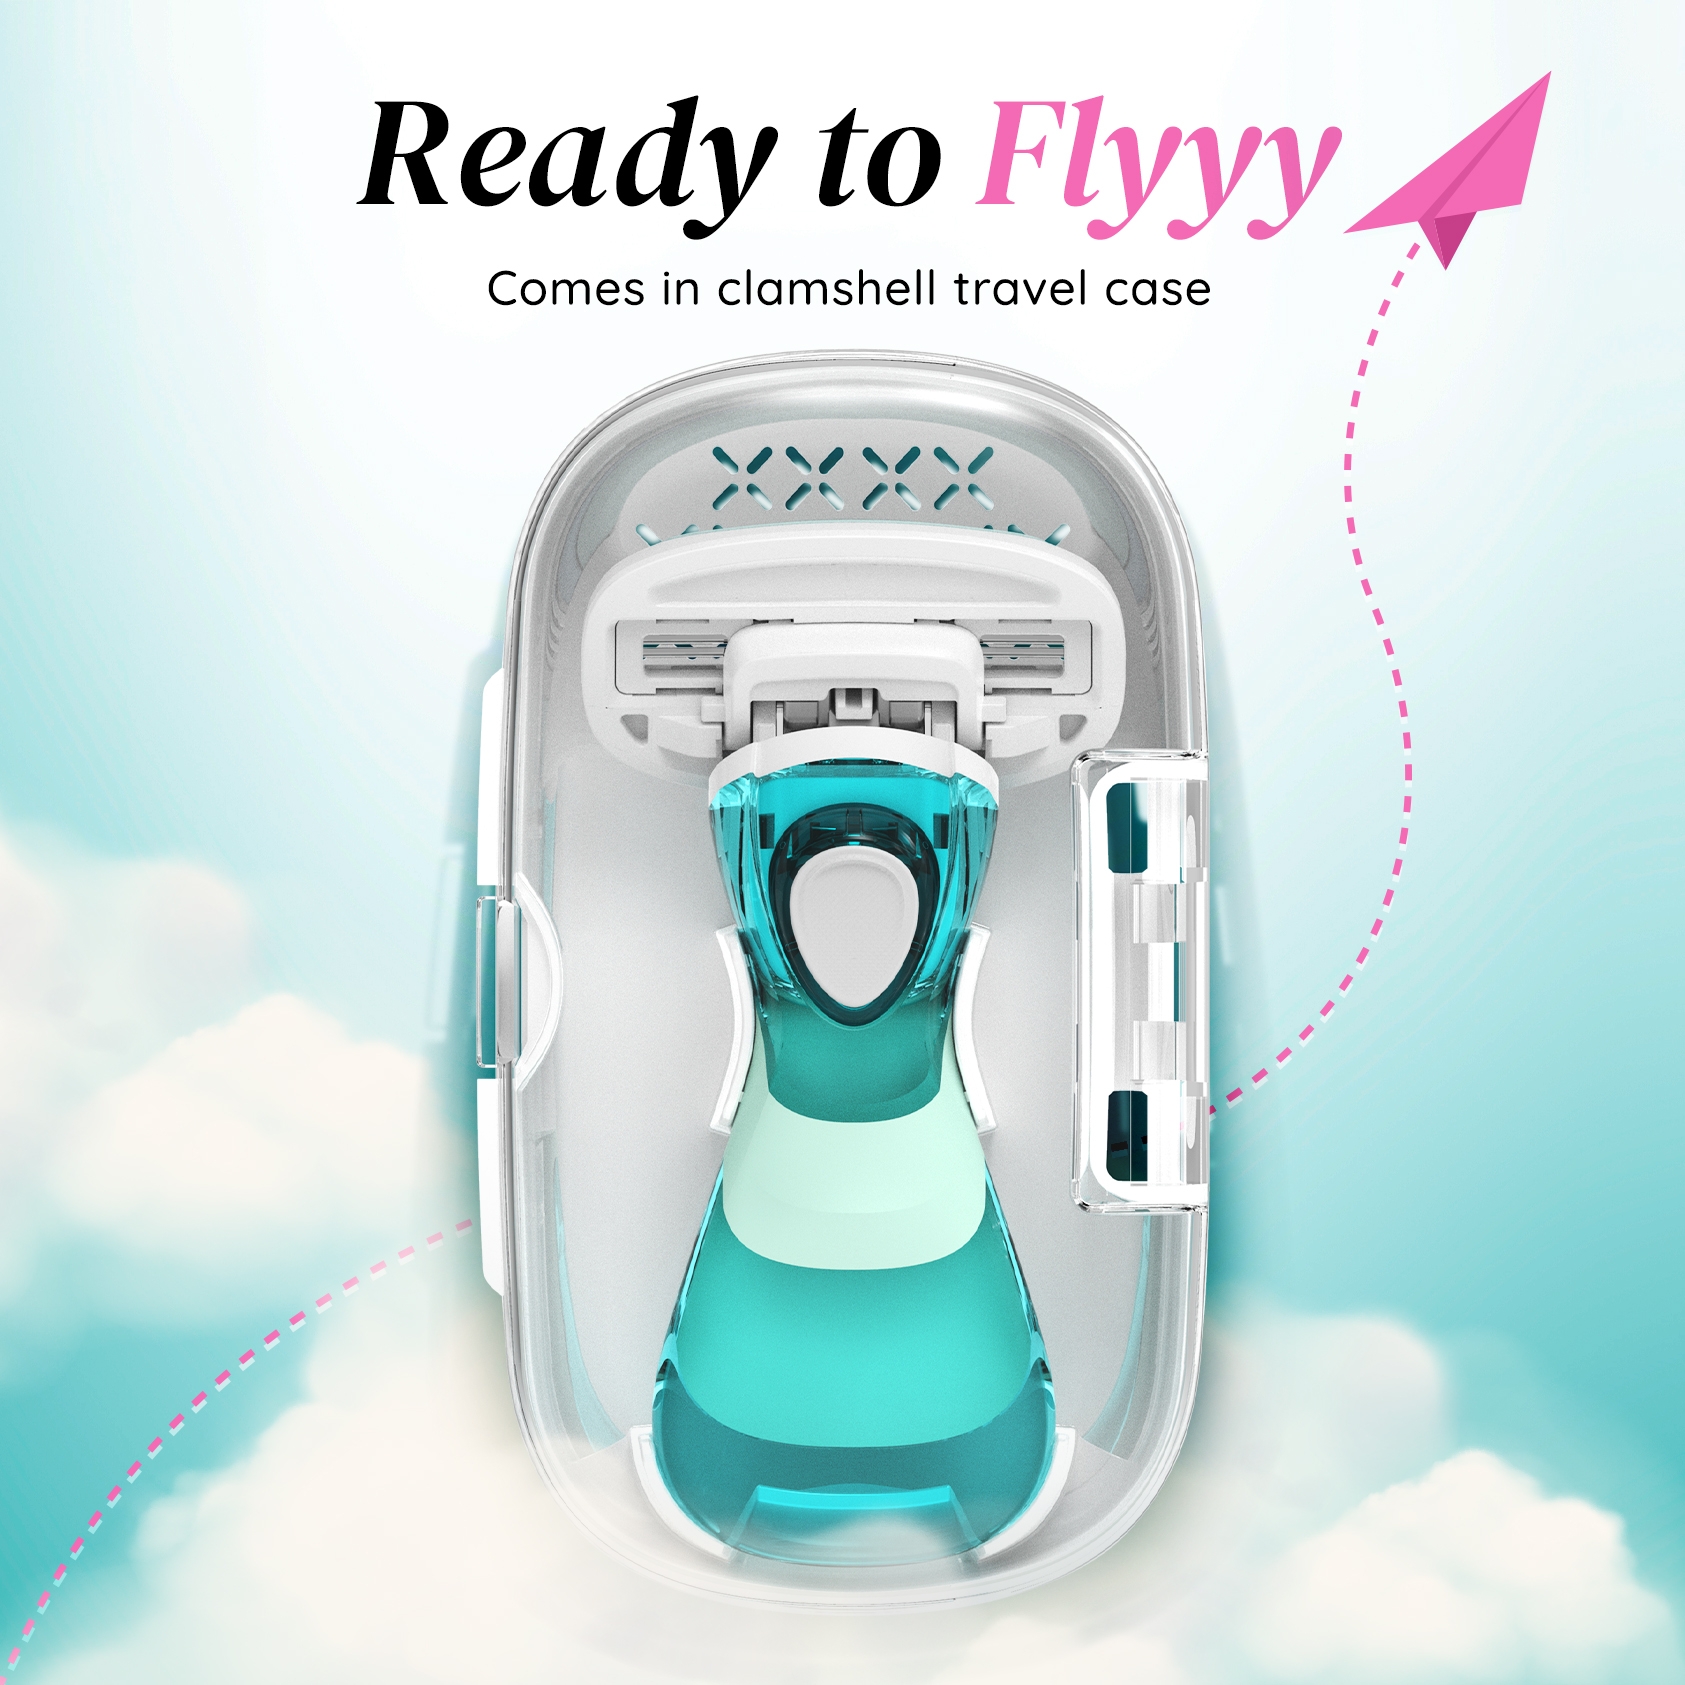 LetsShave | LetsShave Evior Flyyy Compact Razor for Women with Travel Case|3 Blade Full Body Hair Removal Razor for Girls |Wide Head & OpenFlow Cartridge 6